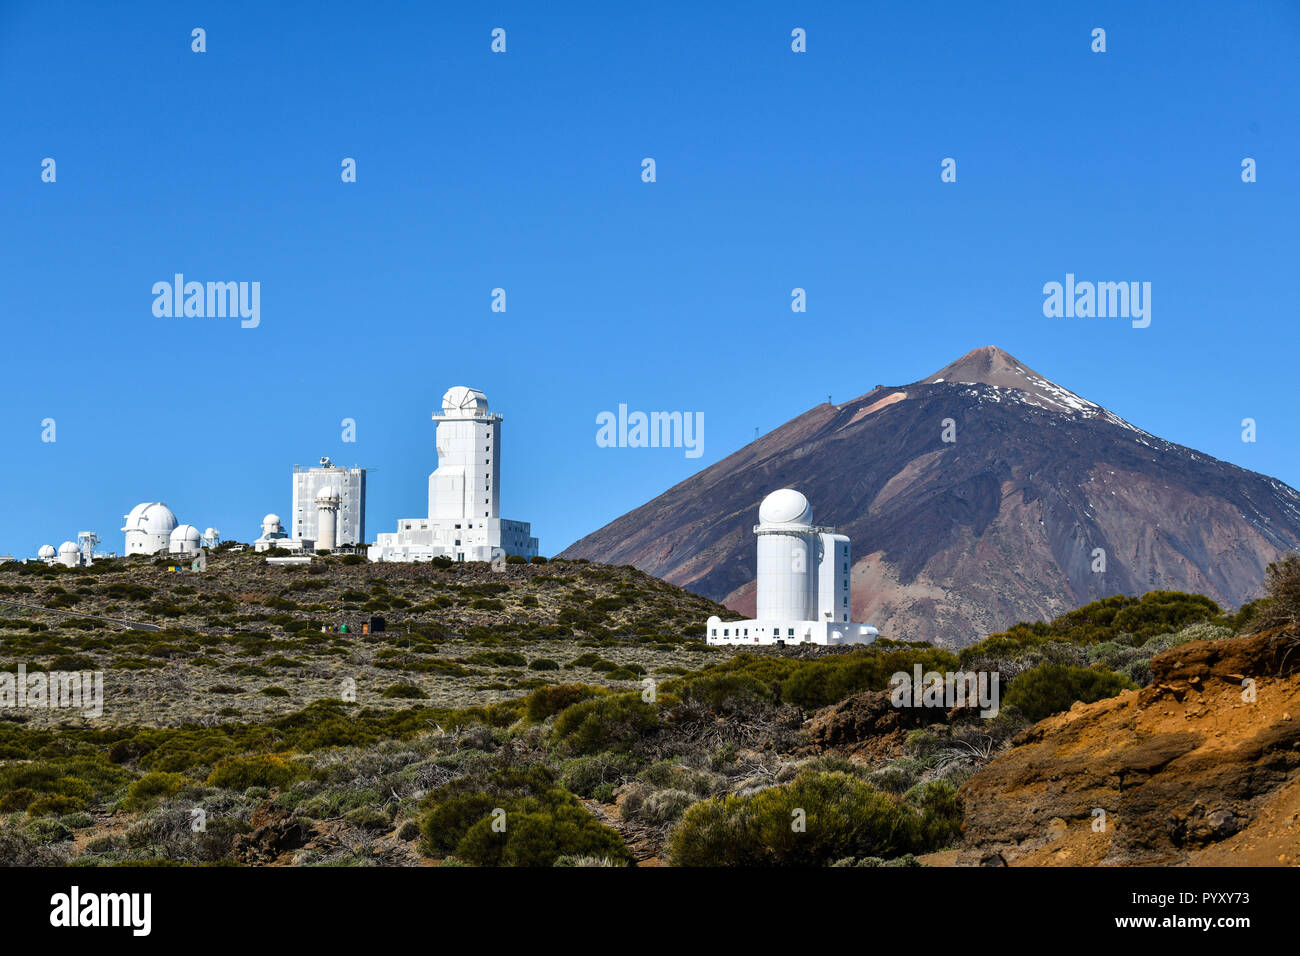 Spain; Canary Islands: Tenerife. Teide Observatory, operated by the astrophysical research institute “Instituto de Astrofísica de Canarias”. *** Local Stock Photo